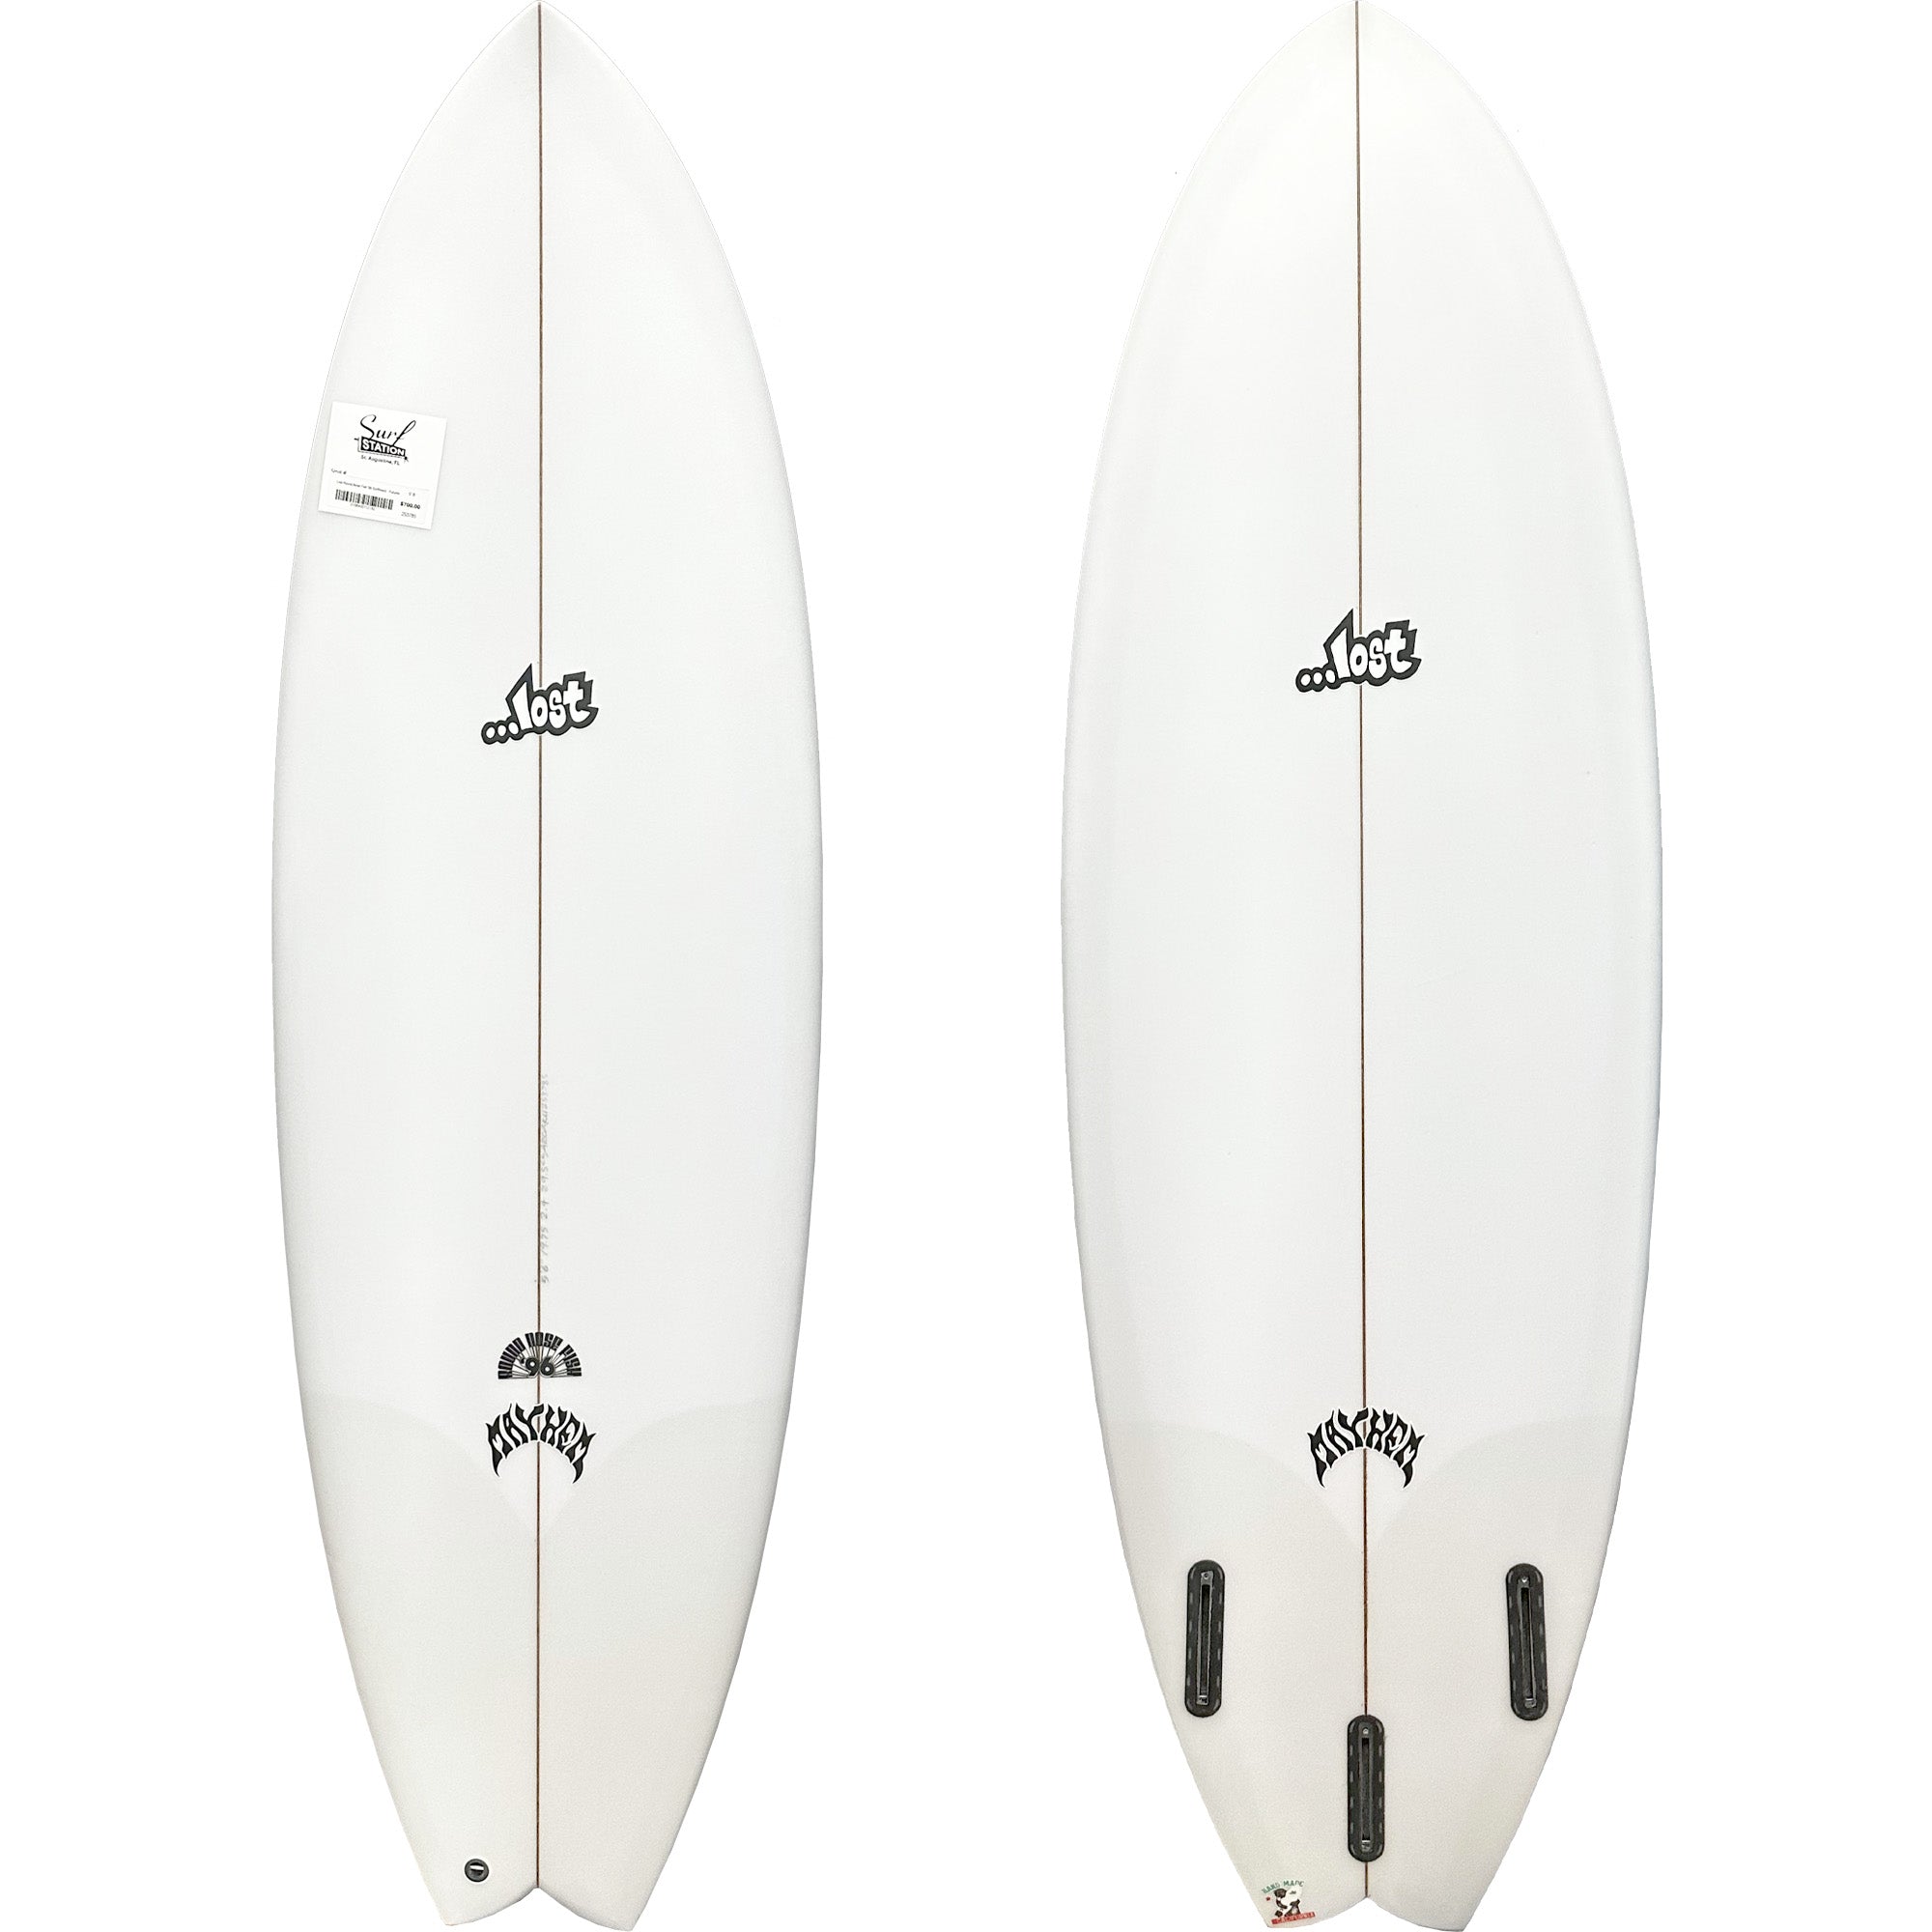 Lost Round Nose Fish '96 Surfboard - Futures